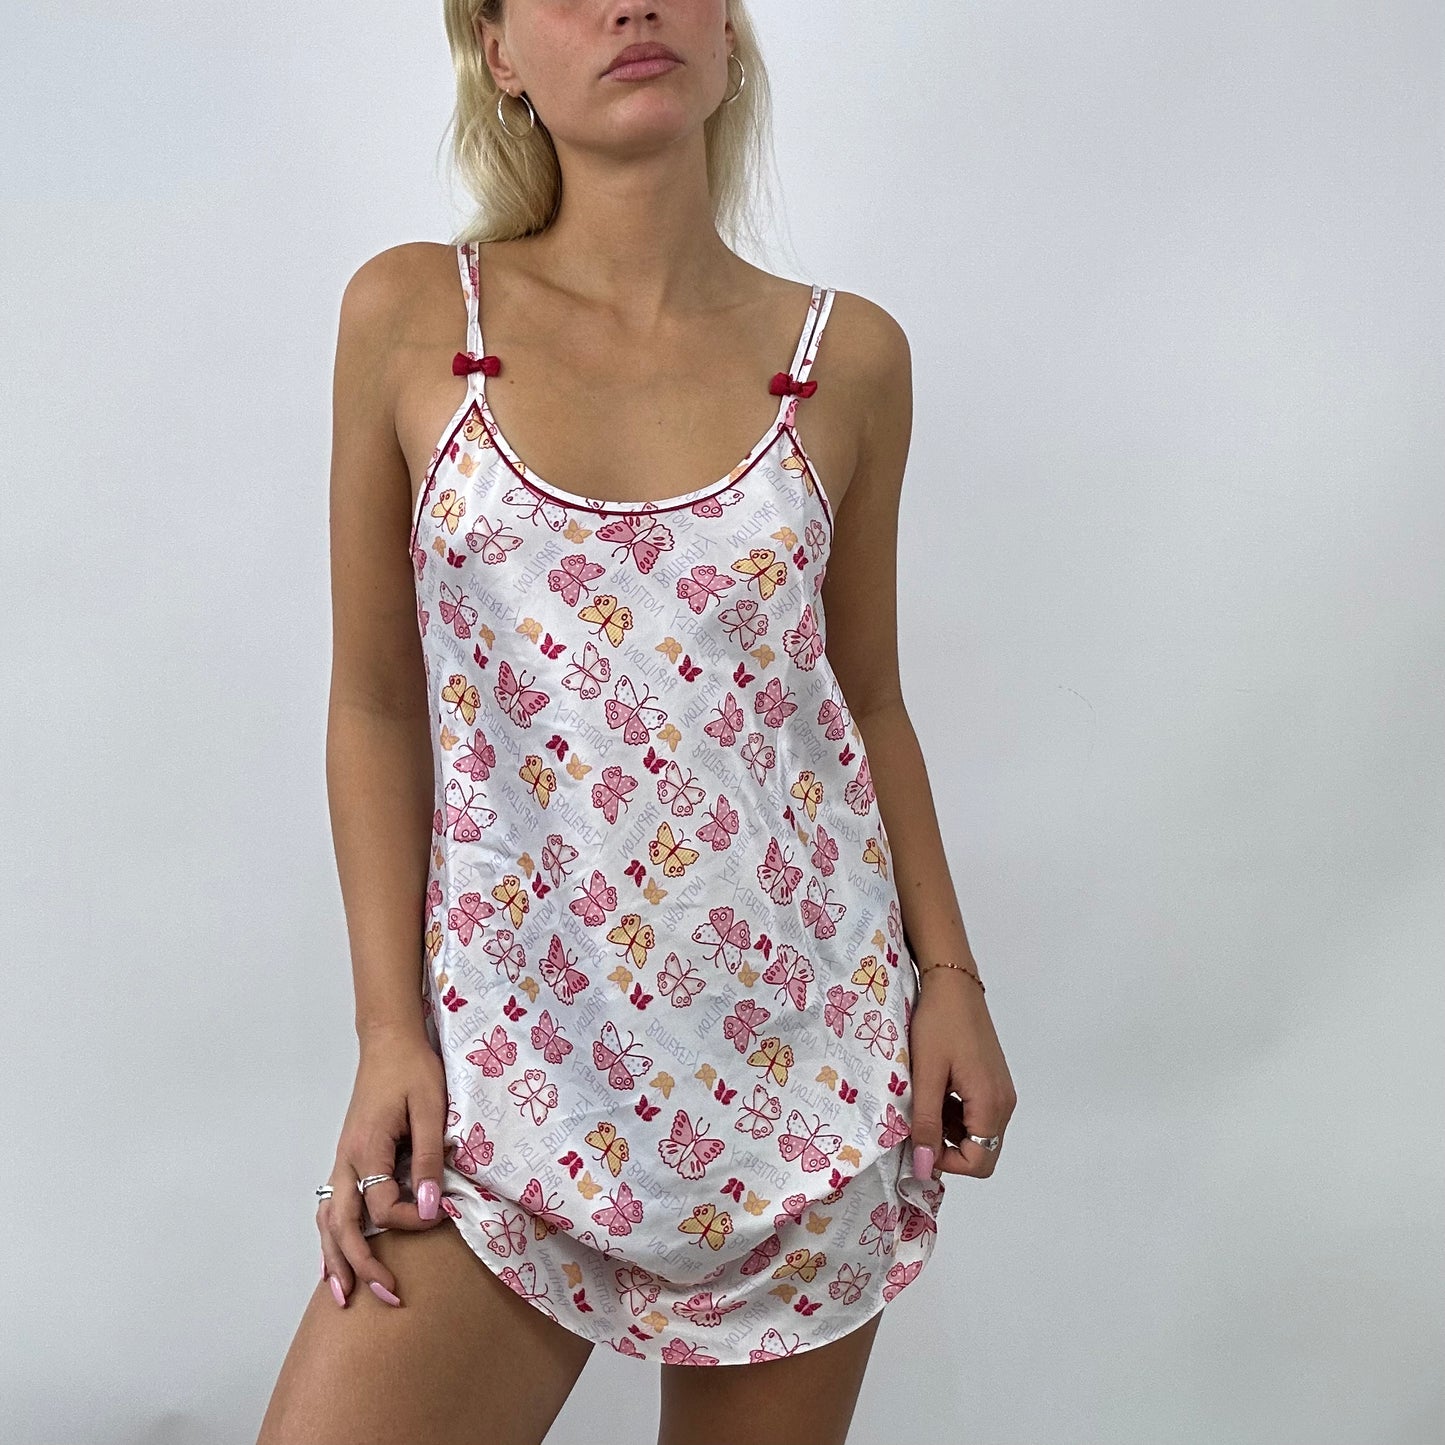 💻 BARBIE DROP - flower power barbie | small white slip dress with pink butterfly monogram detail